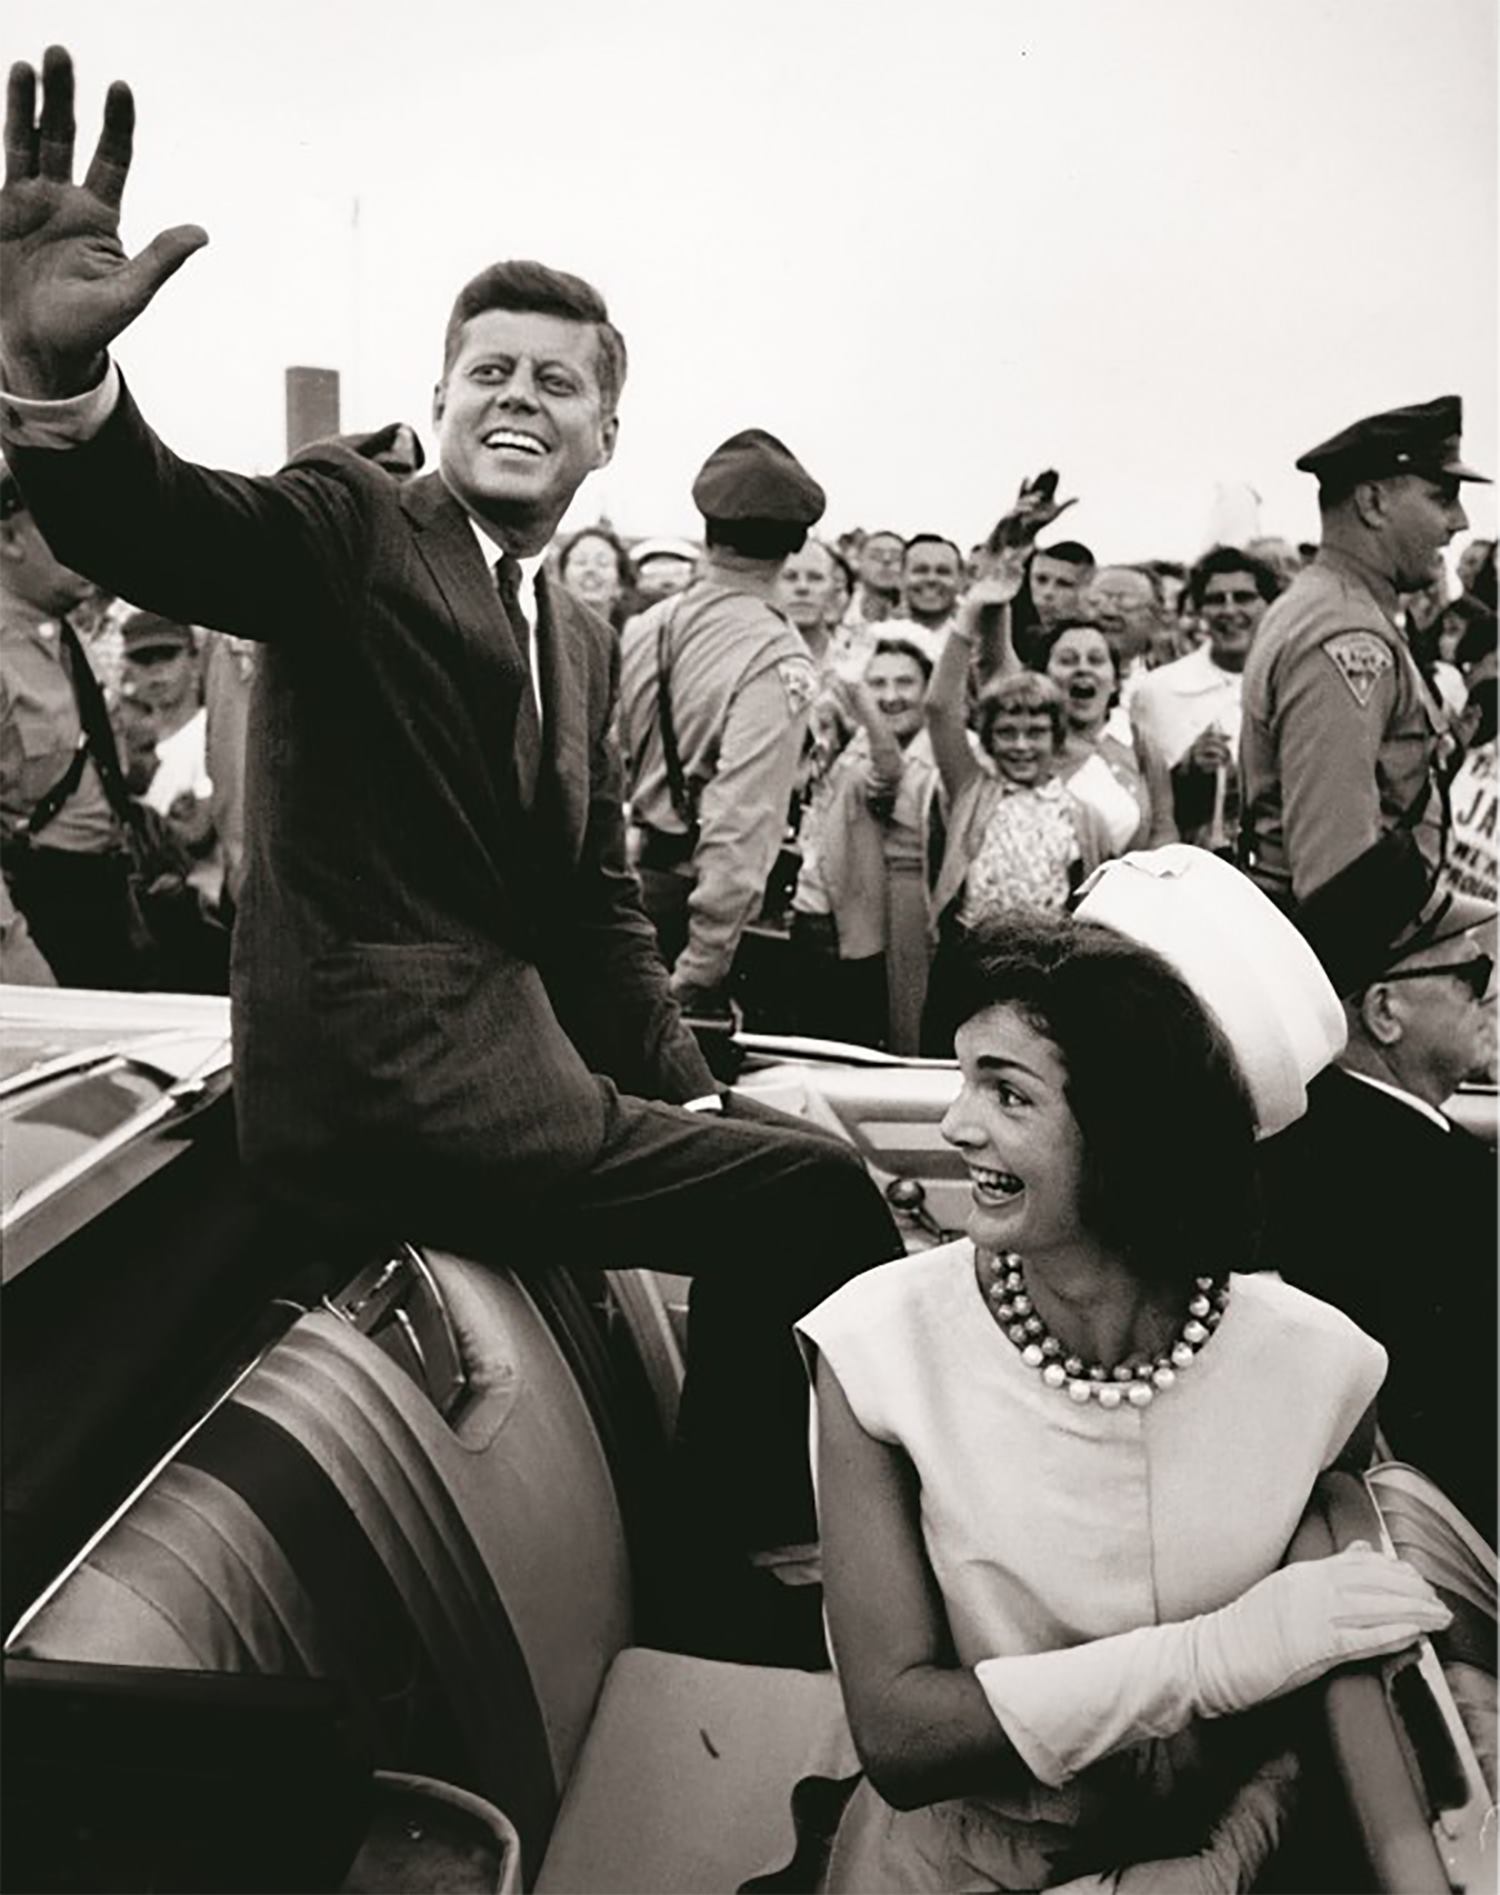 American Visionary: John F. Kennedy’s Life and Times